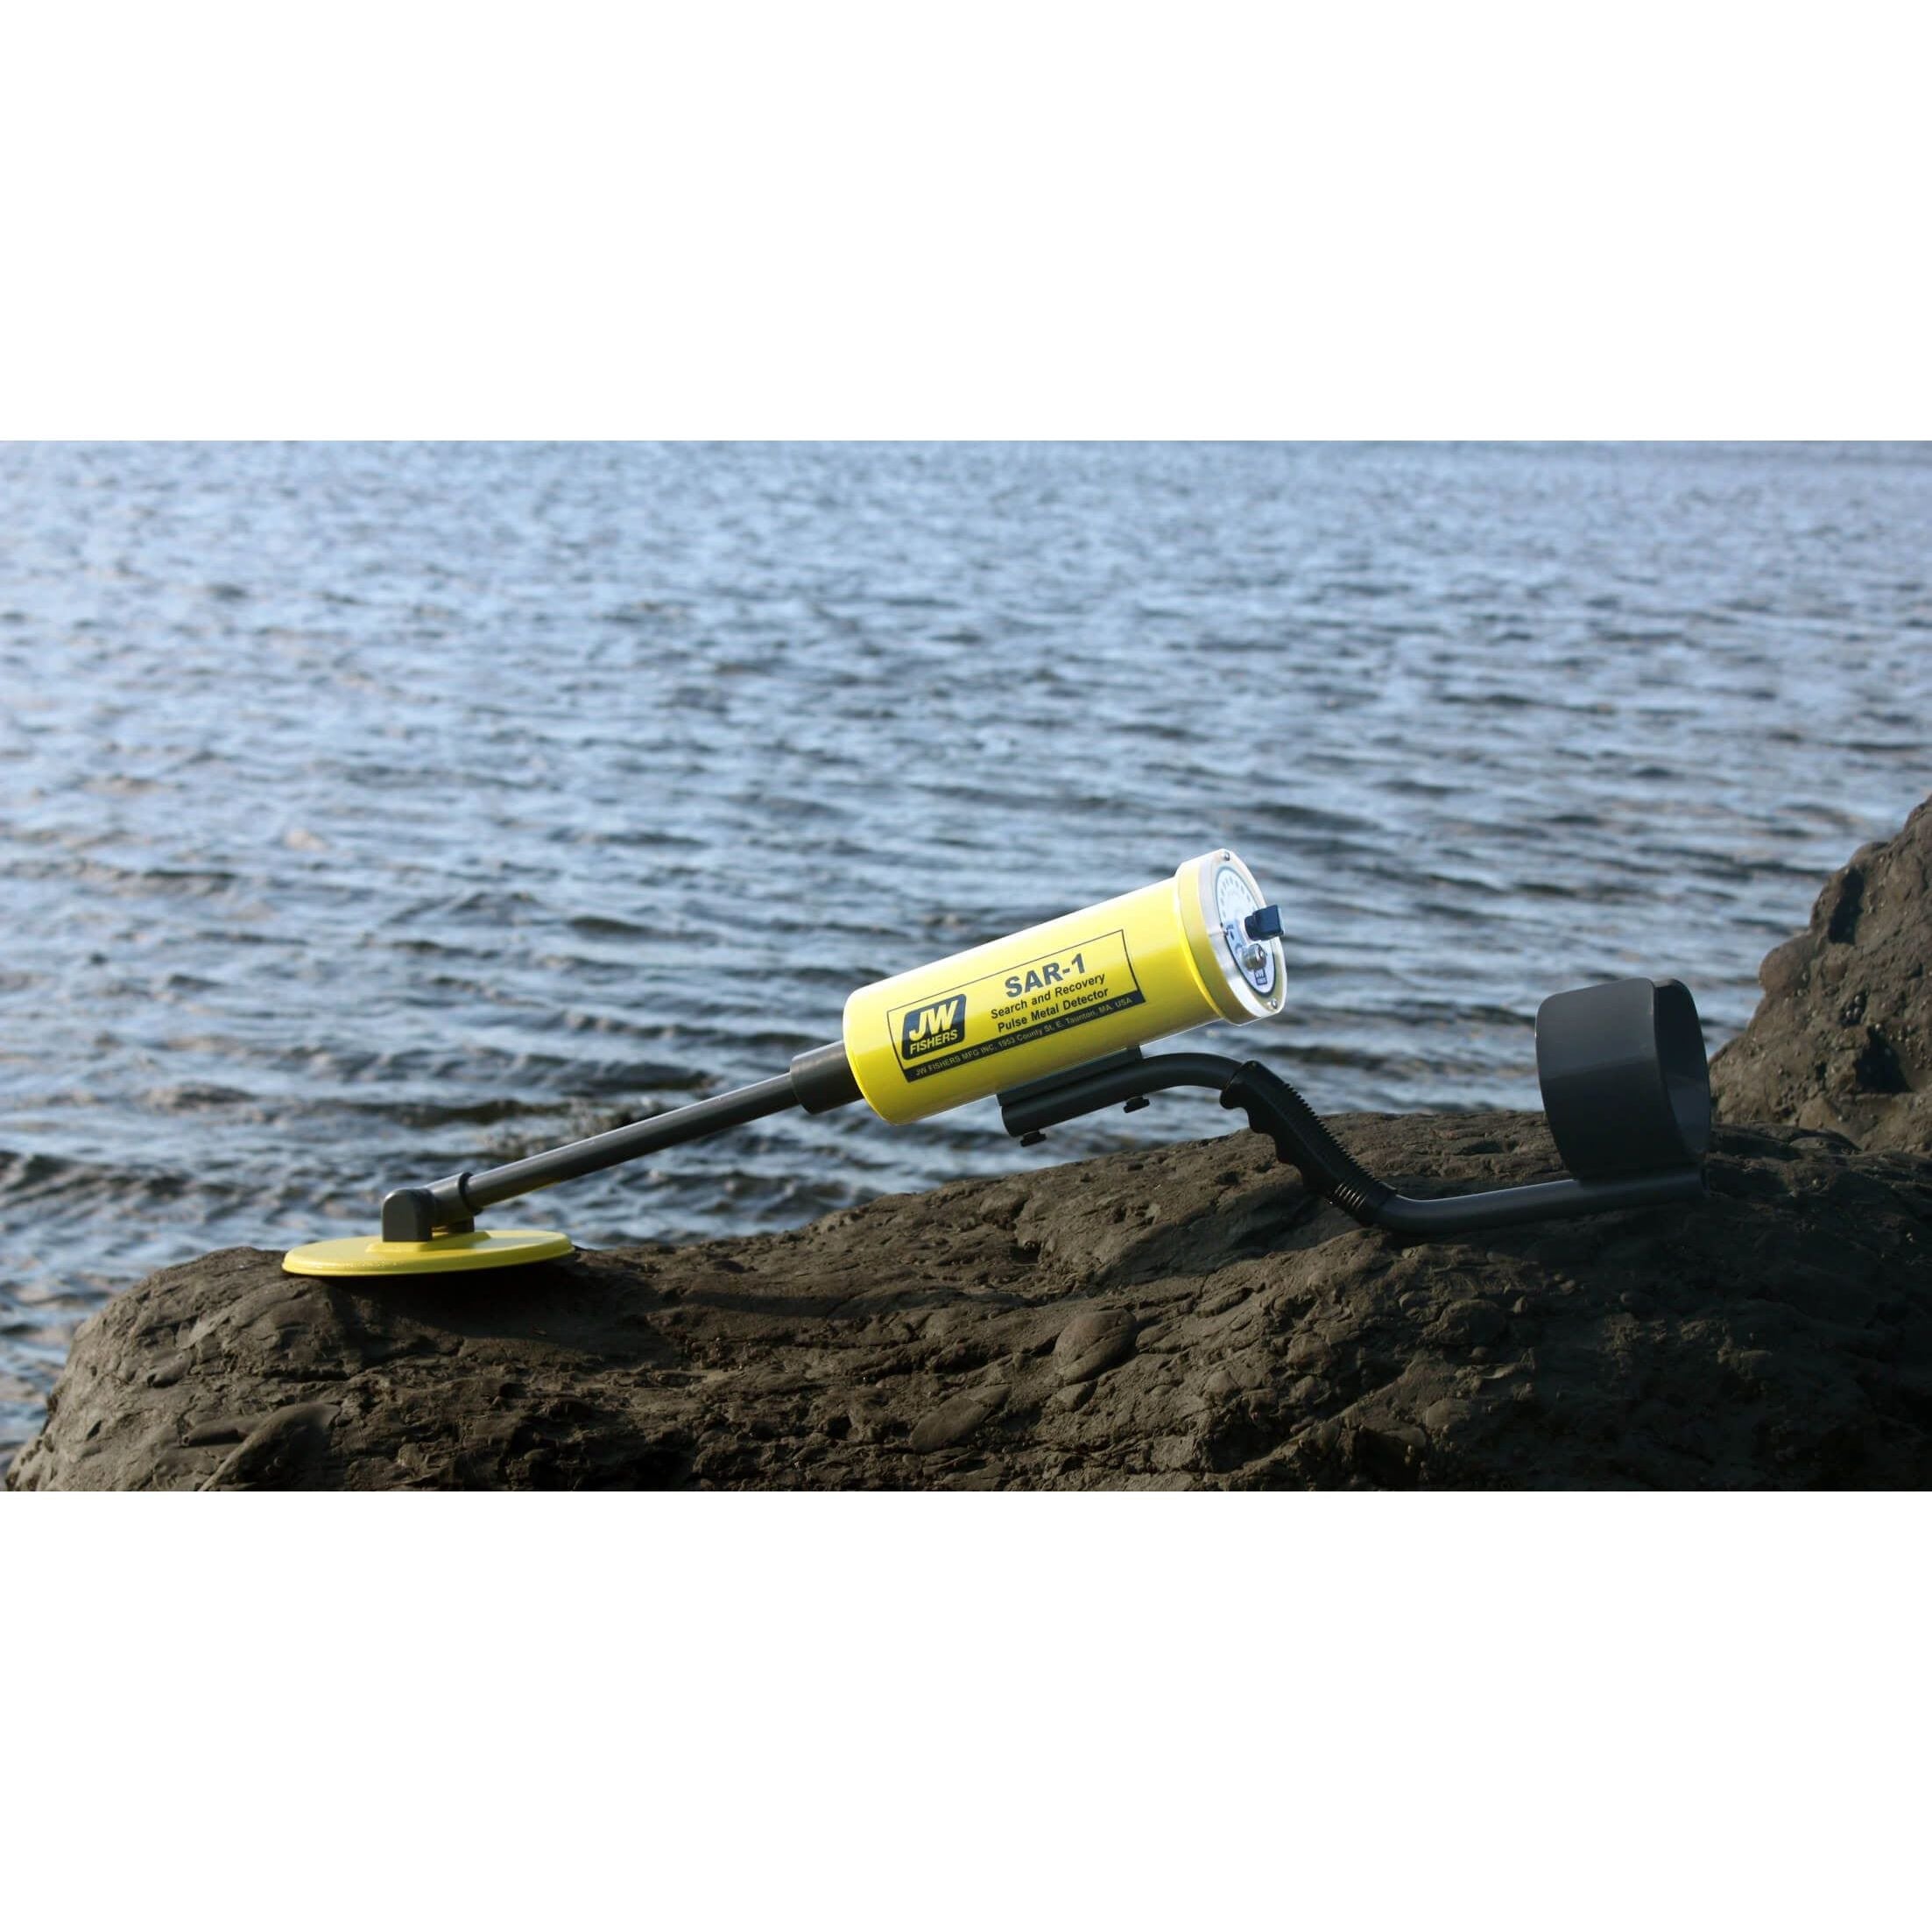 JW Fishers Metal Detector JW Fishers SAR-1 Search and Recovery Underwater Metal Detector with 8" Coil